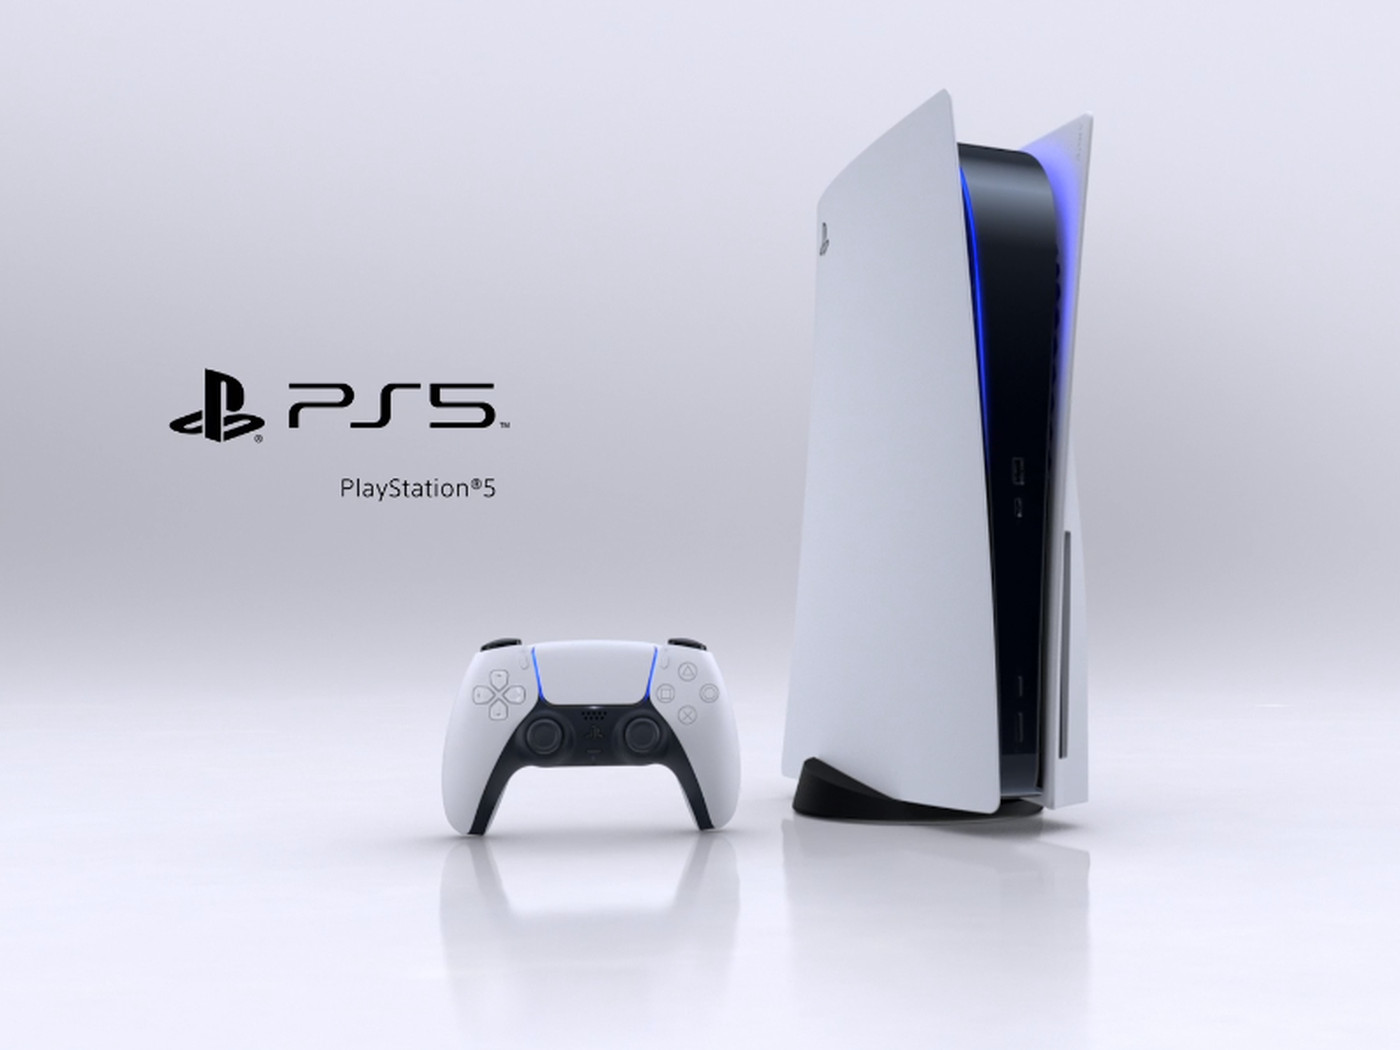 Sony announced that there will be no shortage of PlayStation 5 consoles before the launch of PS VR 2